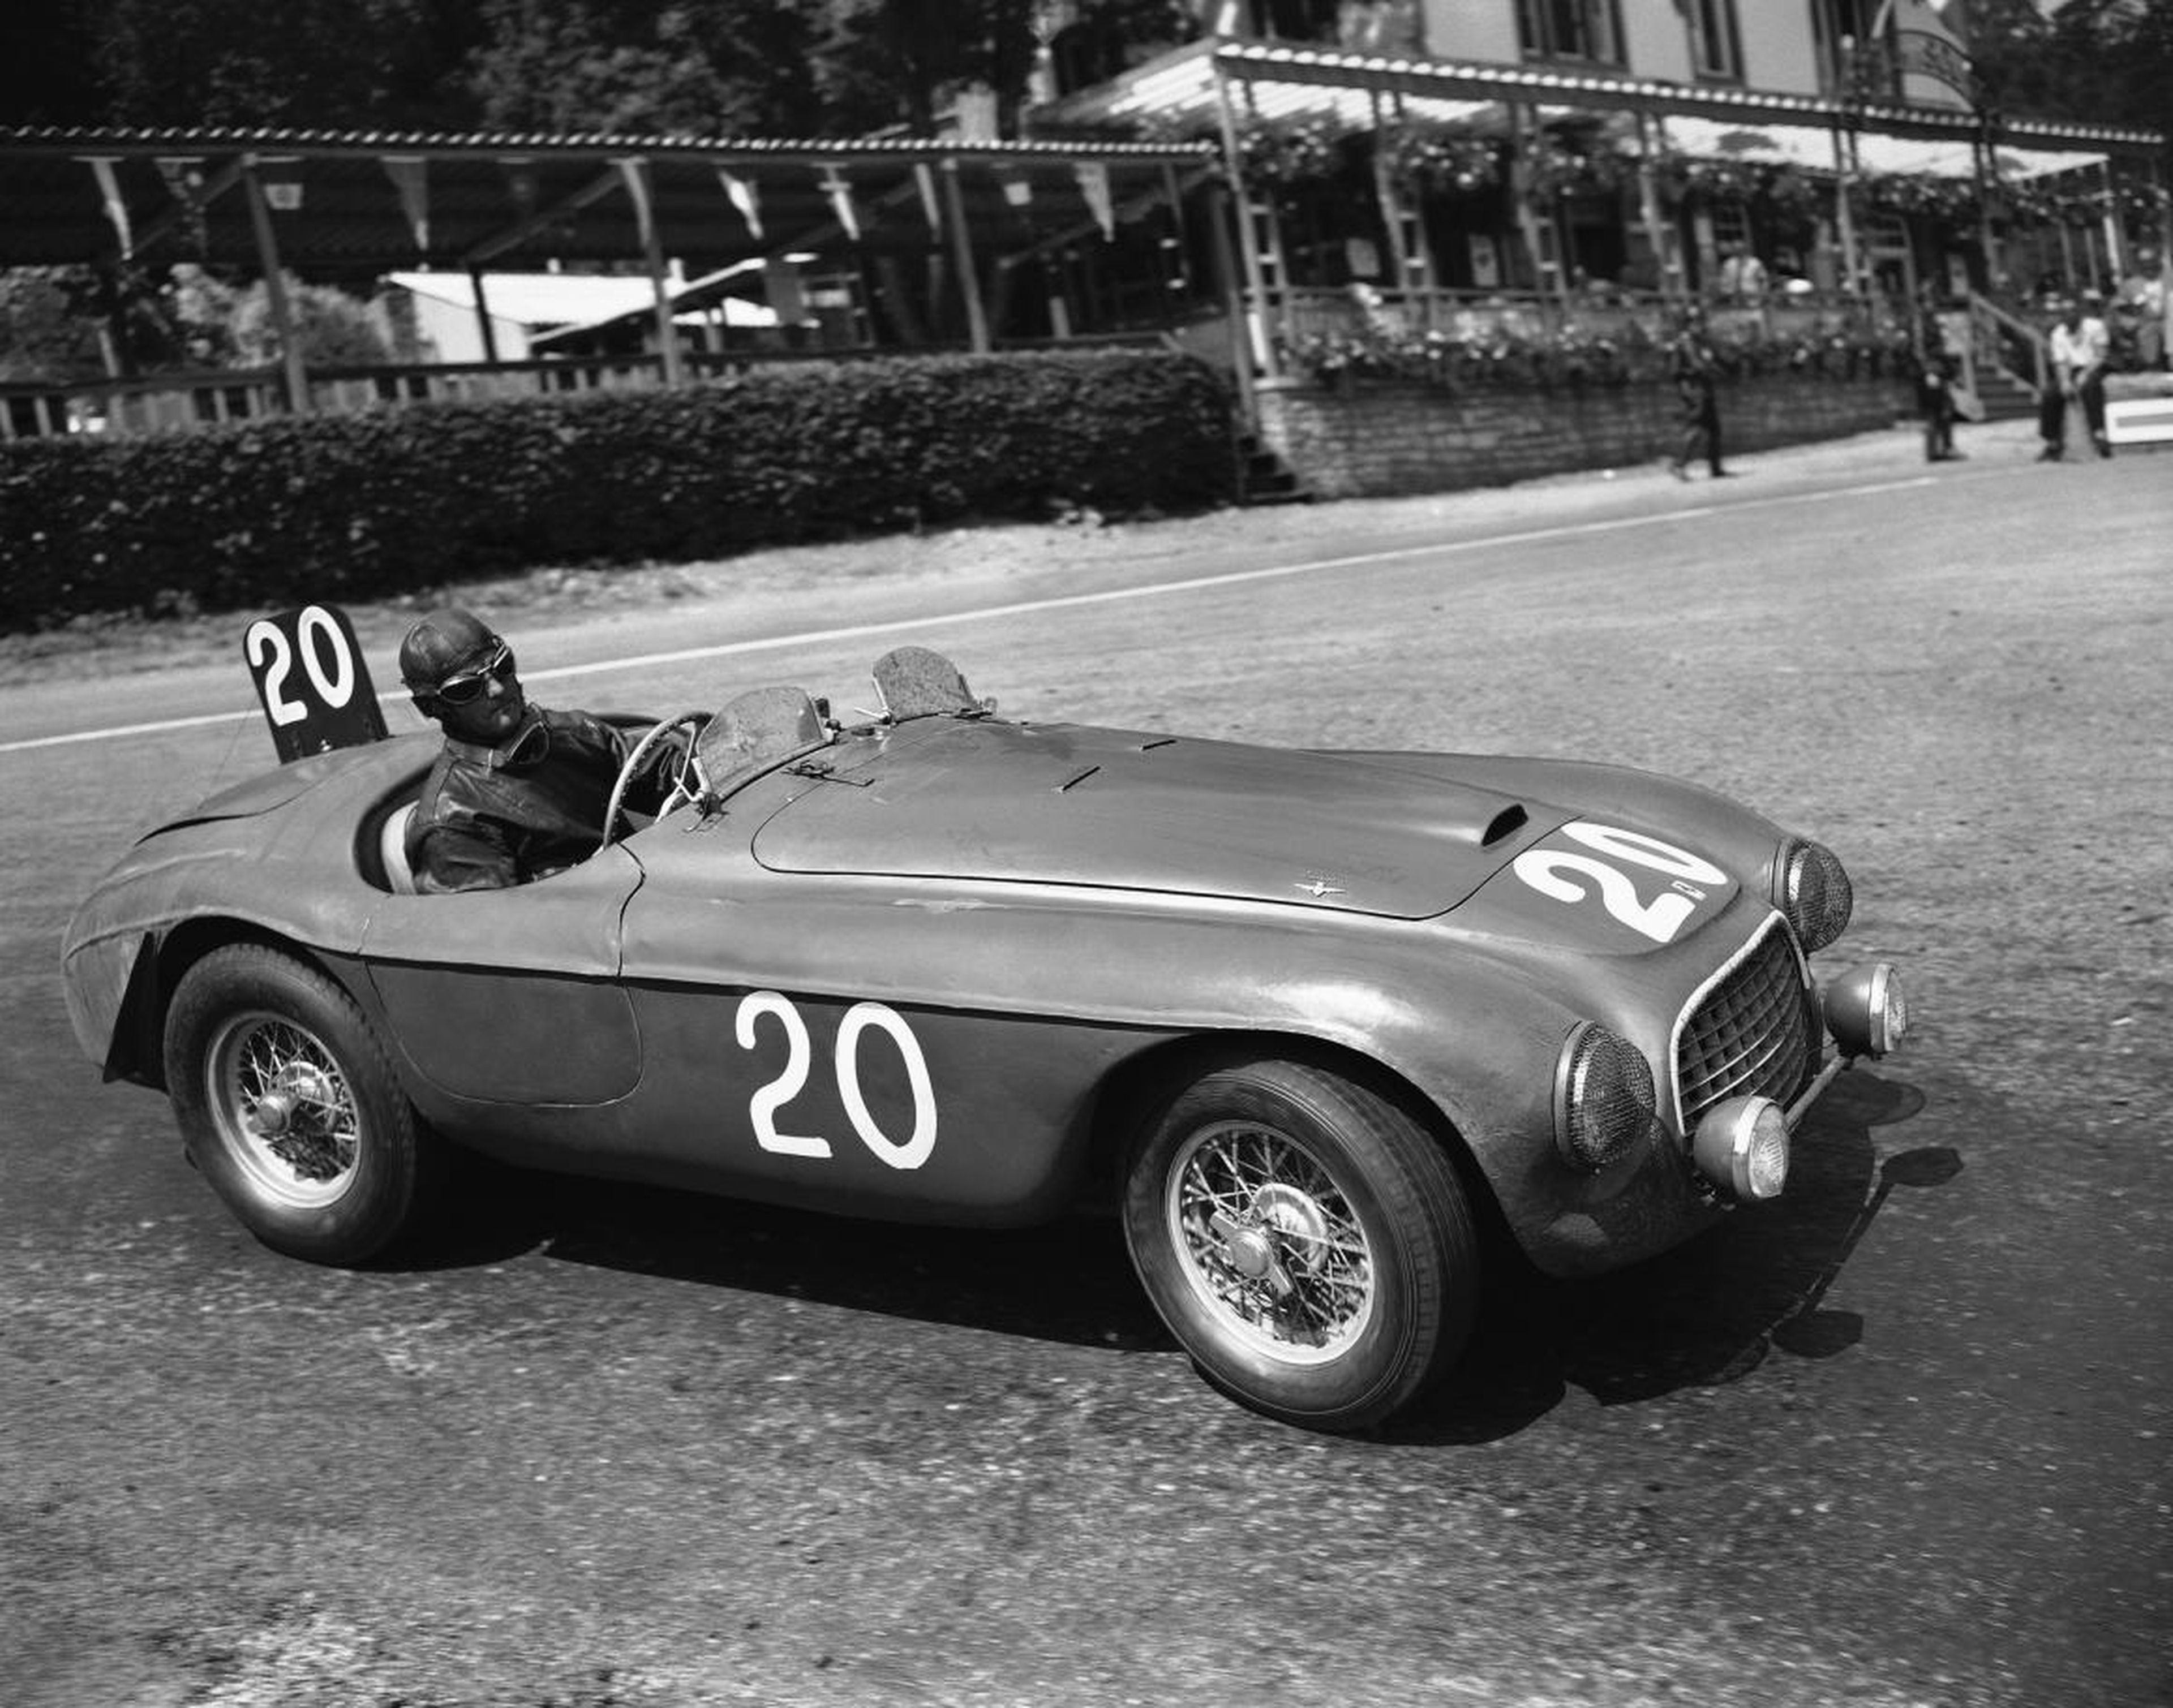 Ferrari was hesitant because his company's main purpose was to win races. At that point, the only cars Ferrari sold were for privateers. Chinetti started racing and winning in Ferrari's cars around the world.